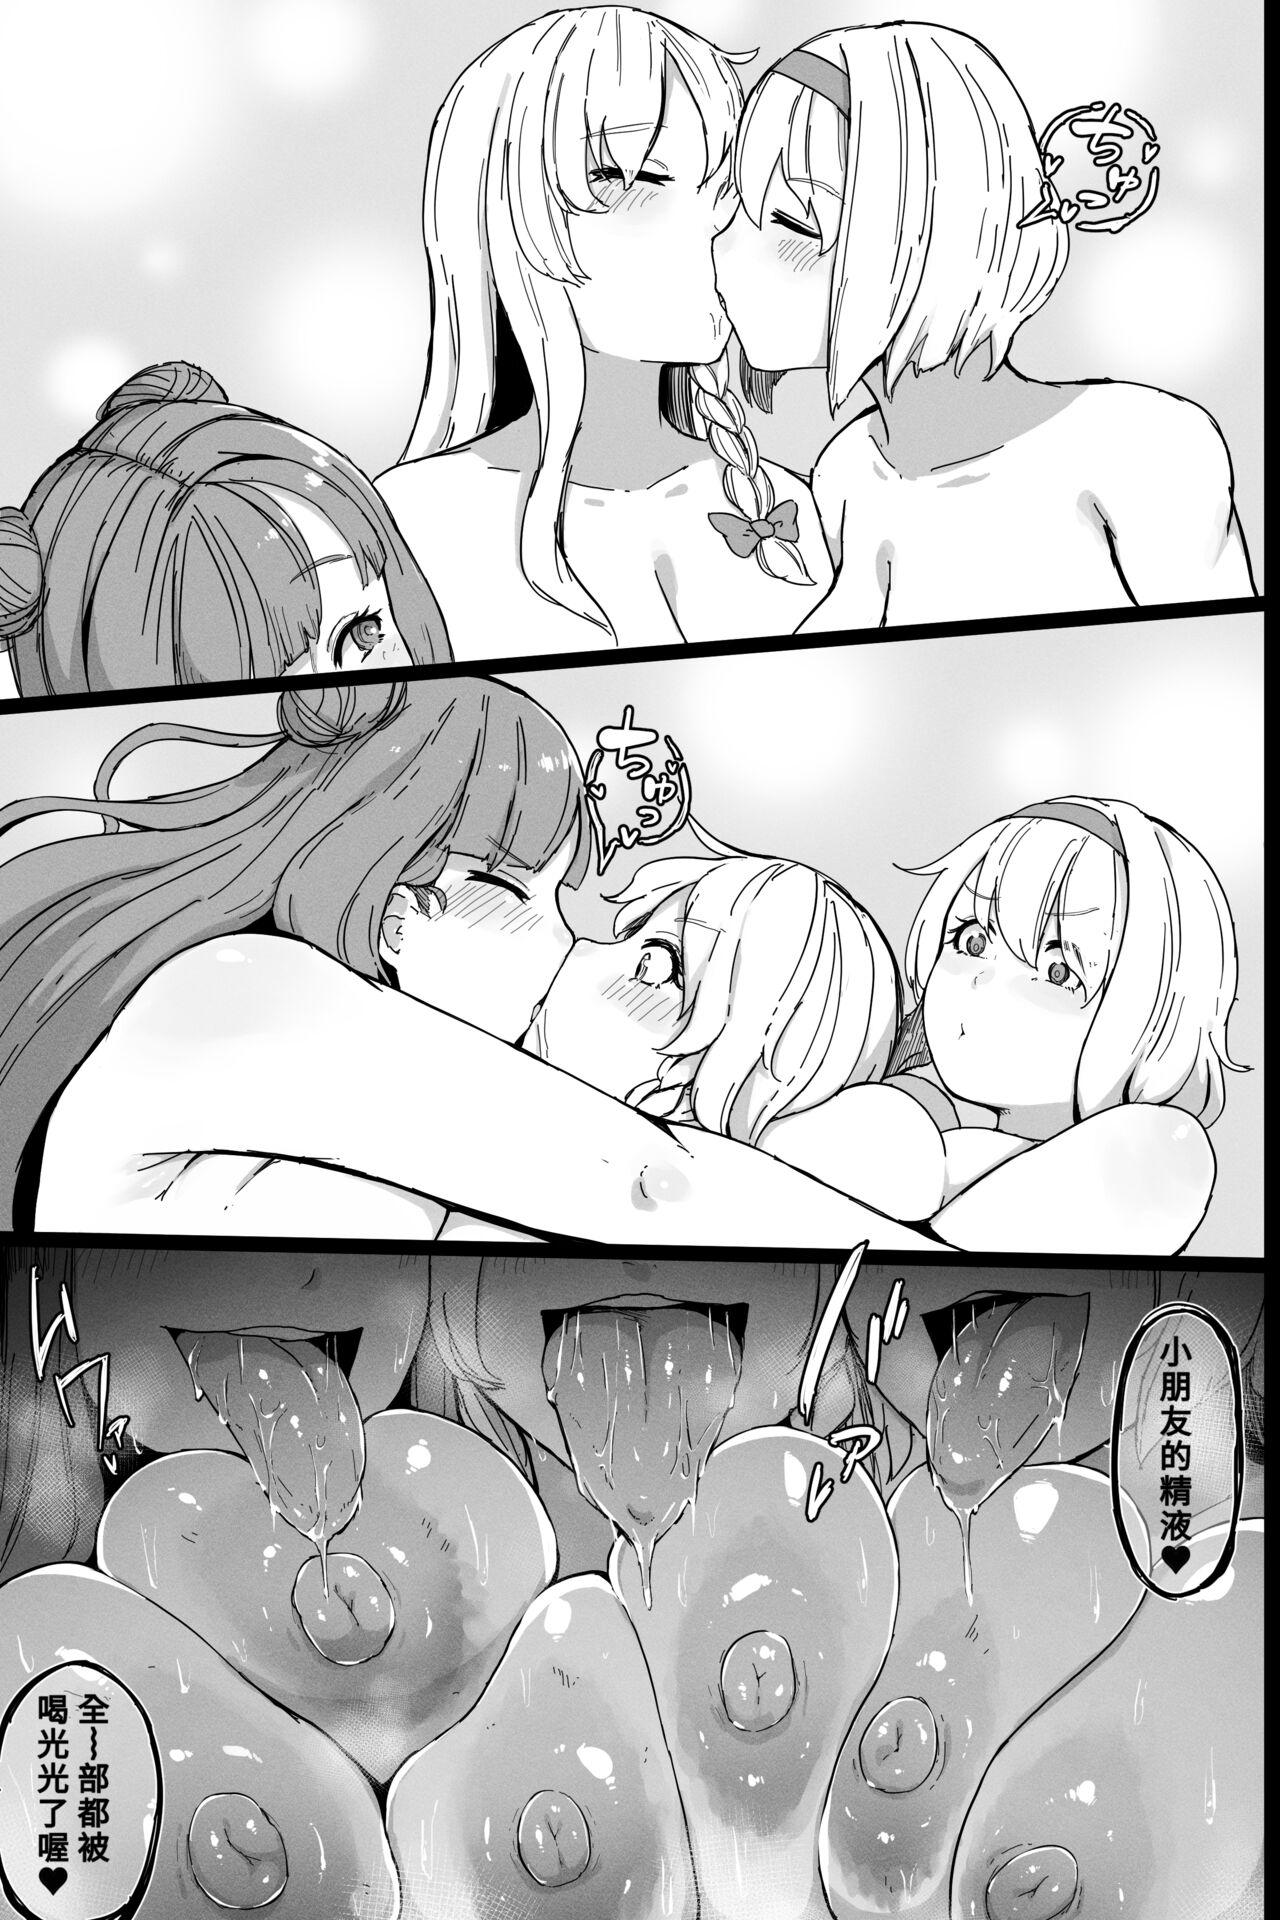 Onlyfans [StarRaisins] 2022-06-06 (Touhou Project) [Chinese] [Banana手工漢化] - Touhou project Dorm - Page 8